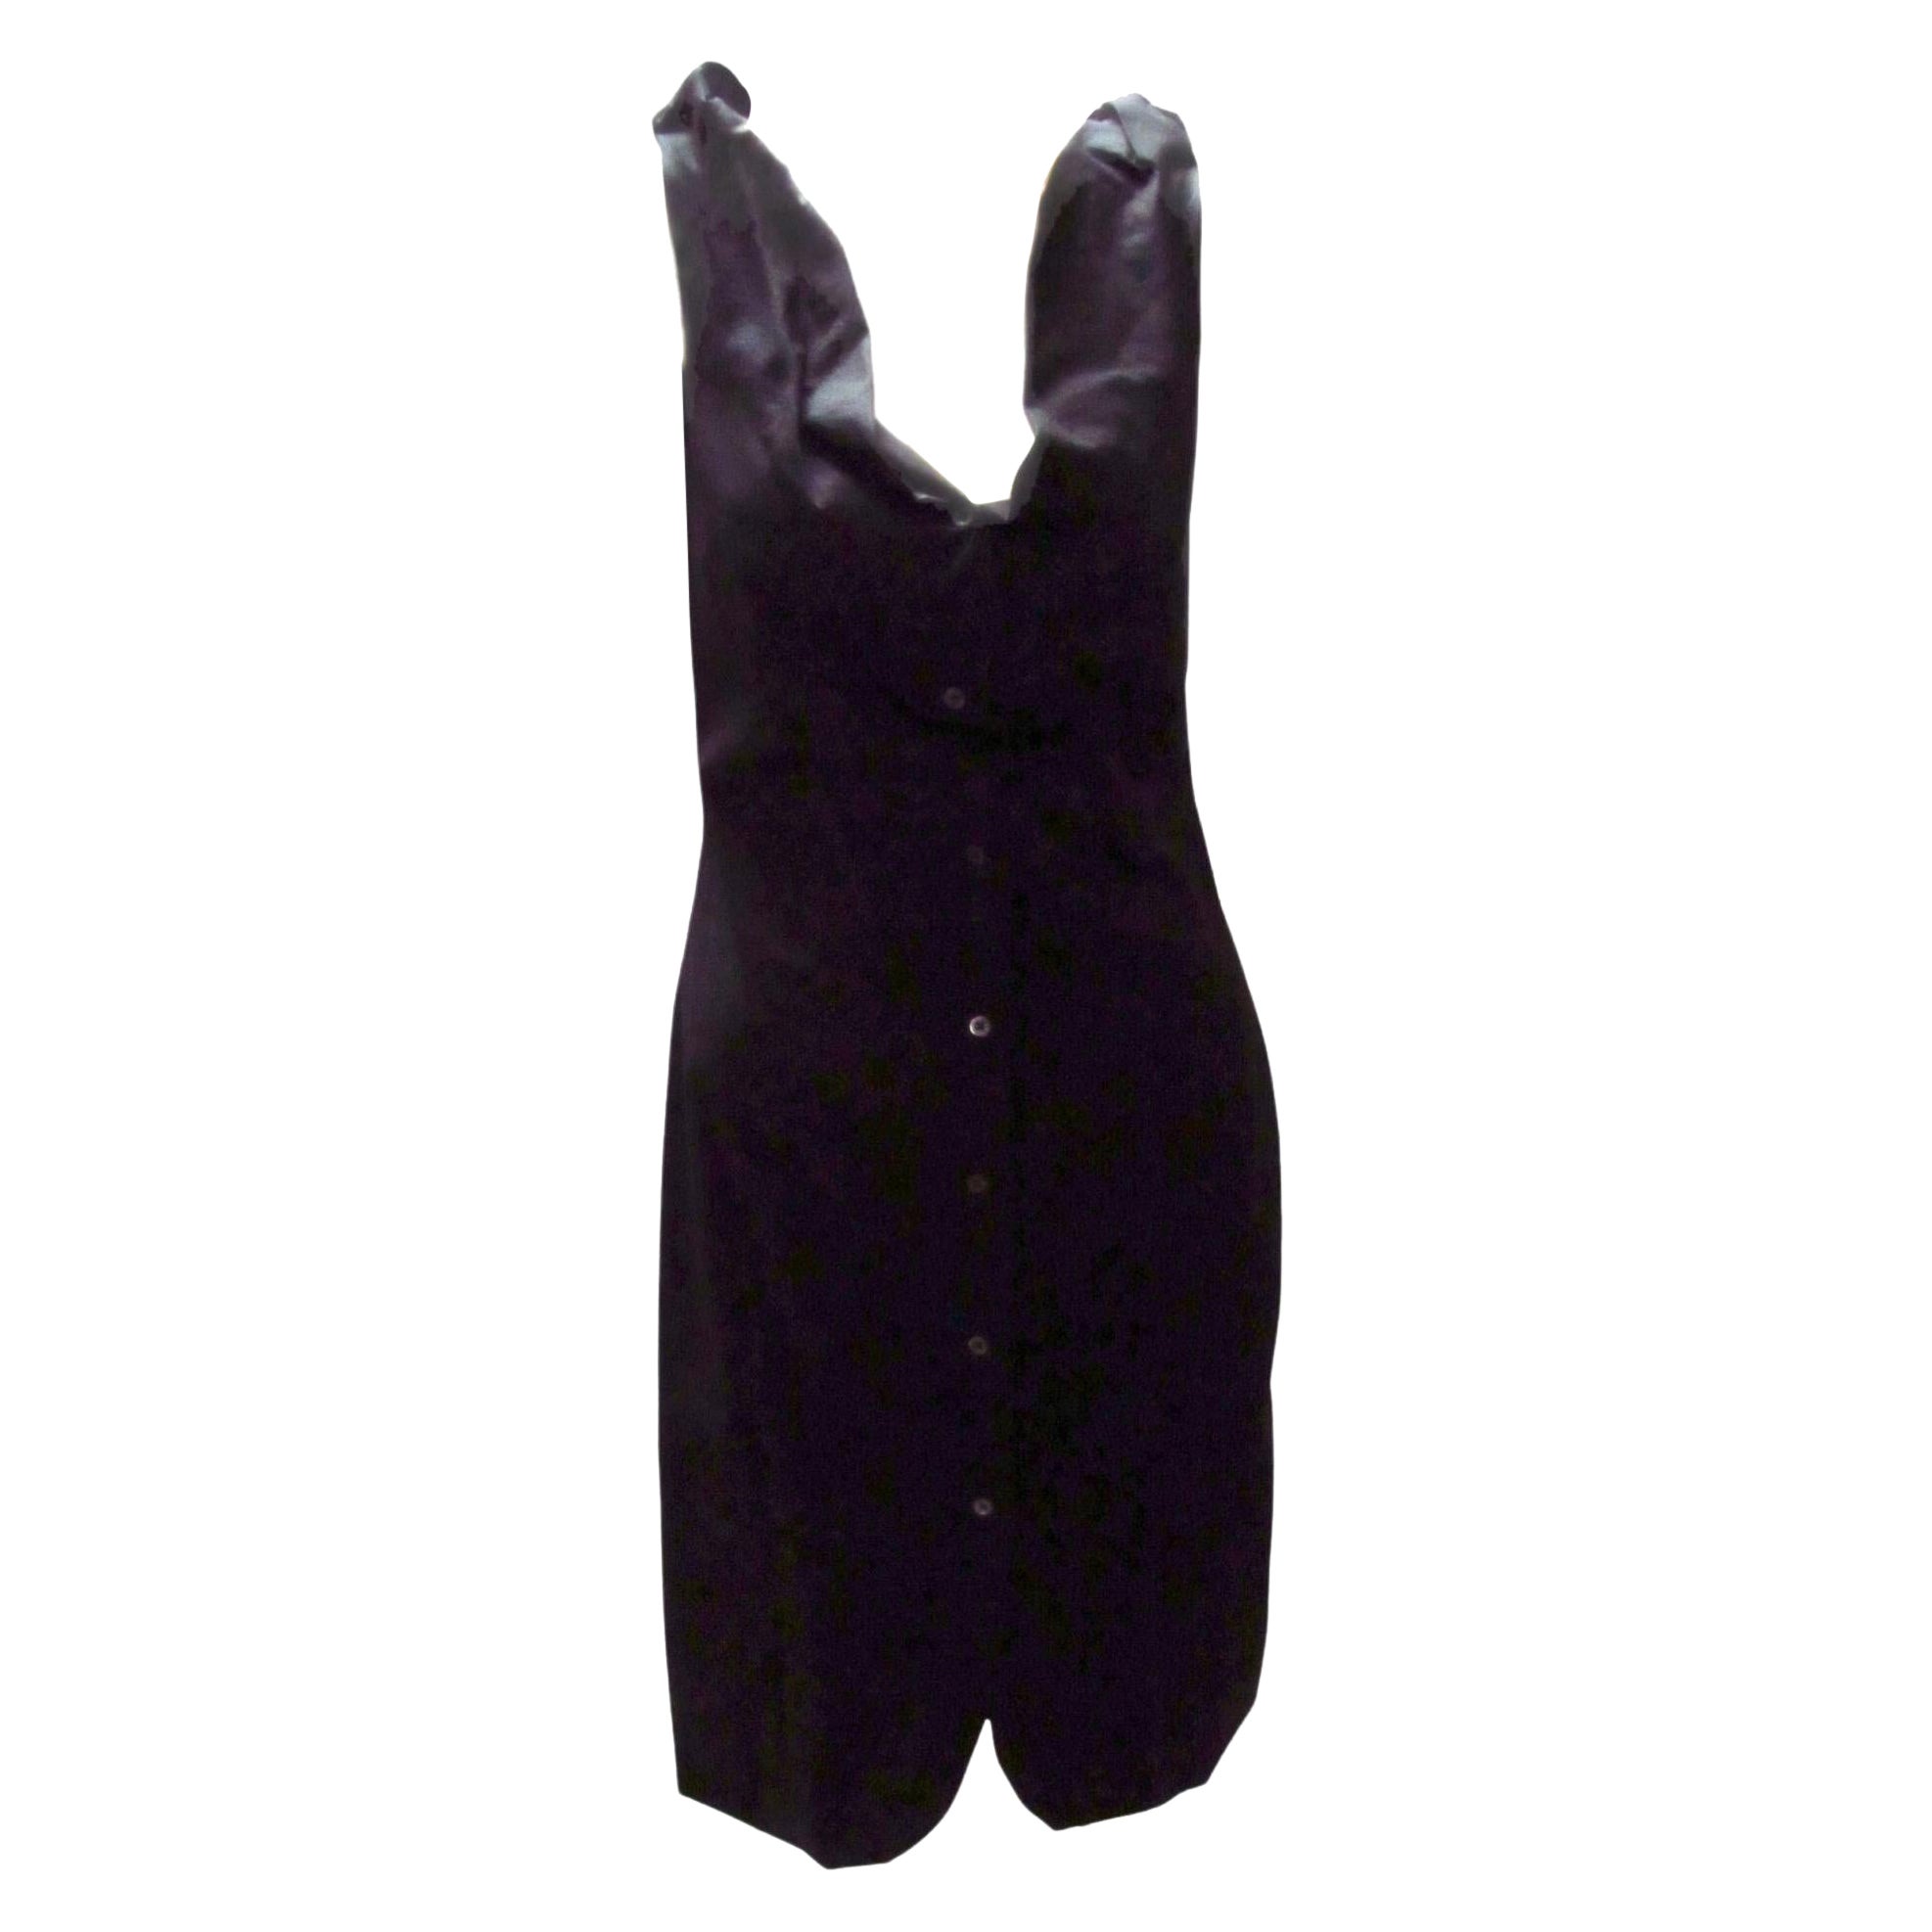 Vivienne Westwood Anglomania Black Bubbly Dress For Sale